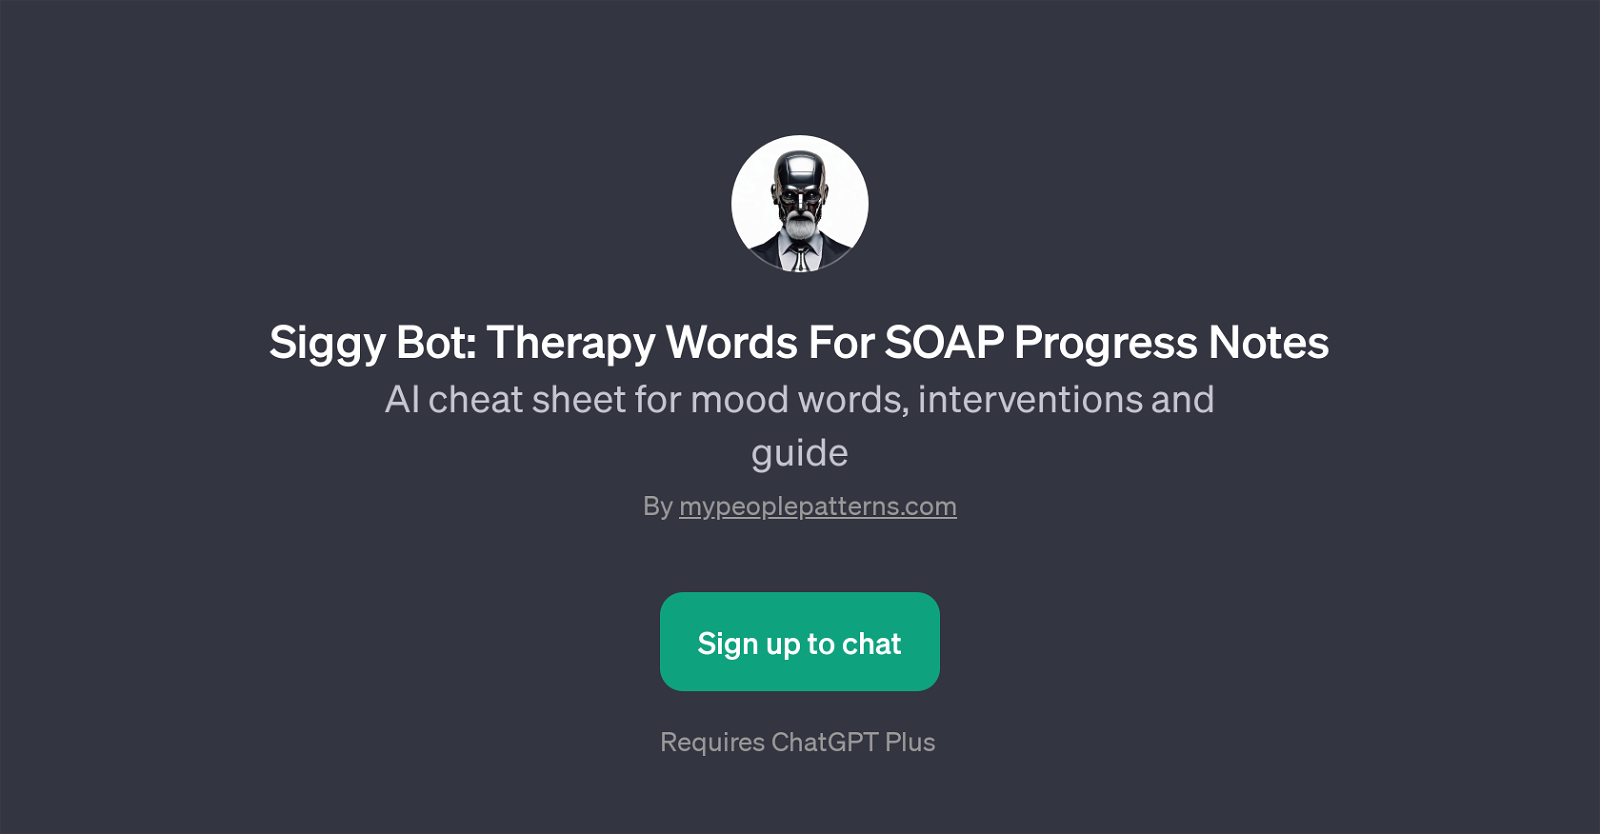 Siggy Bot: Therapy Words For SOAP Progress Notes website